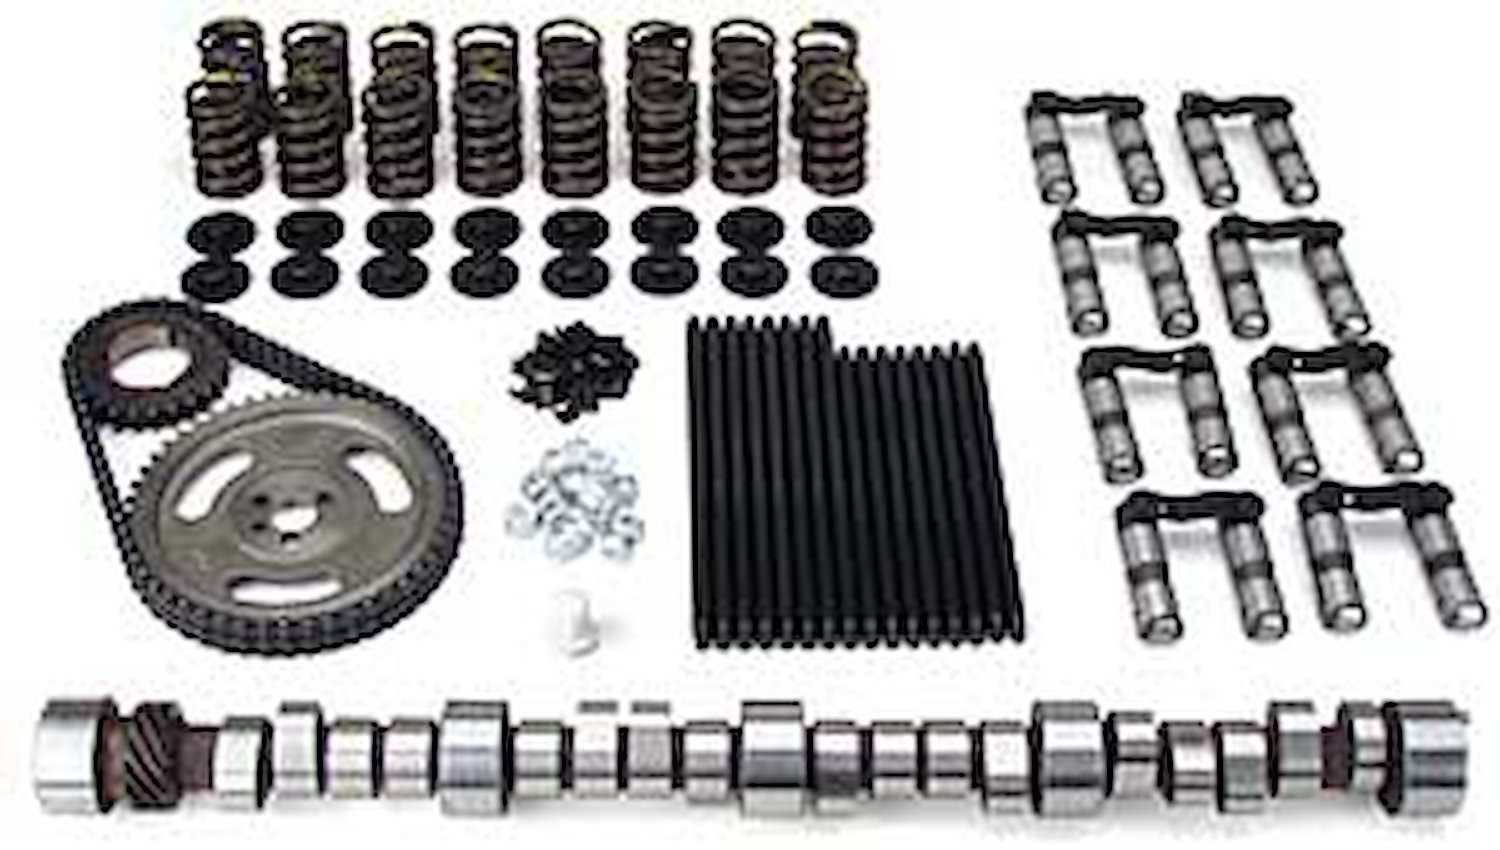 XFI Hydraulic Roller Camshaft Complete Kit Small Block